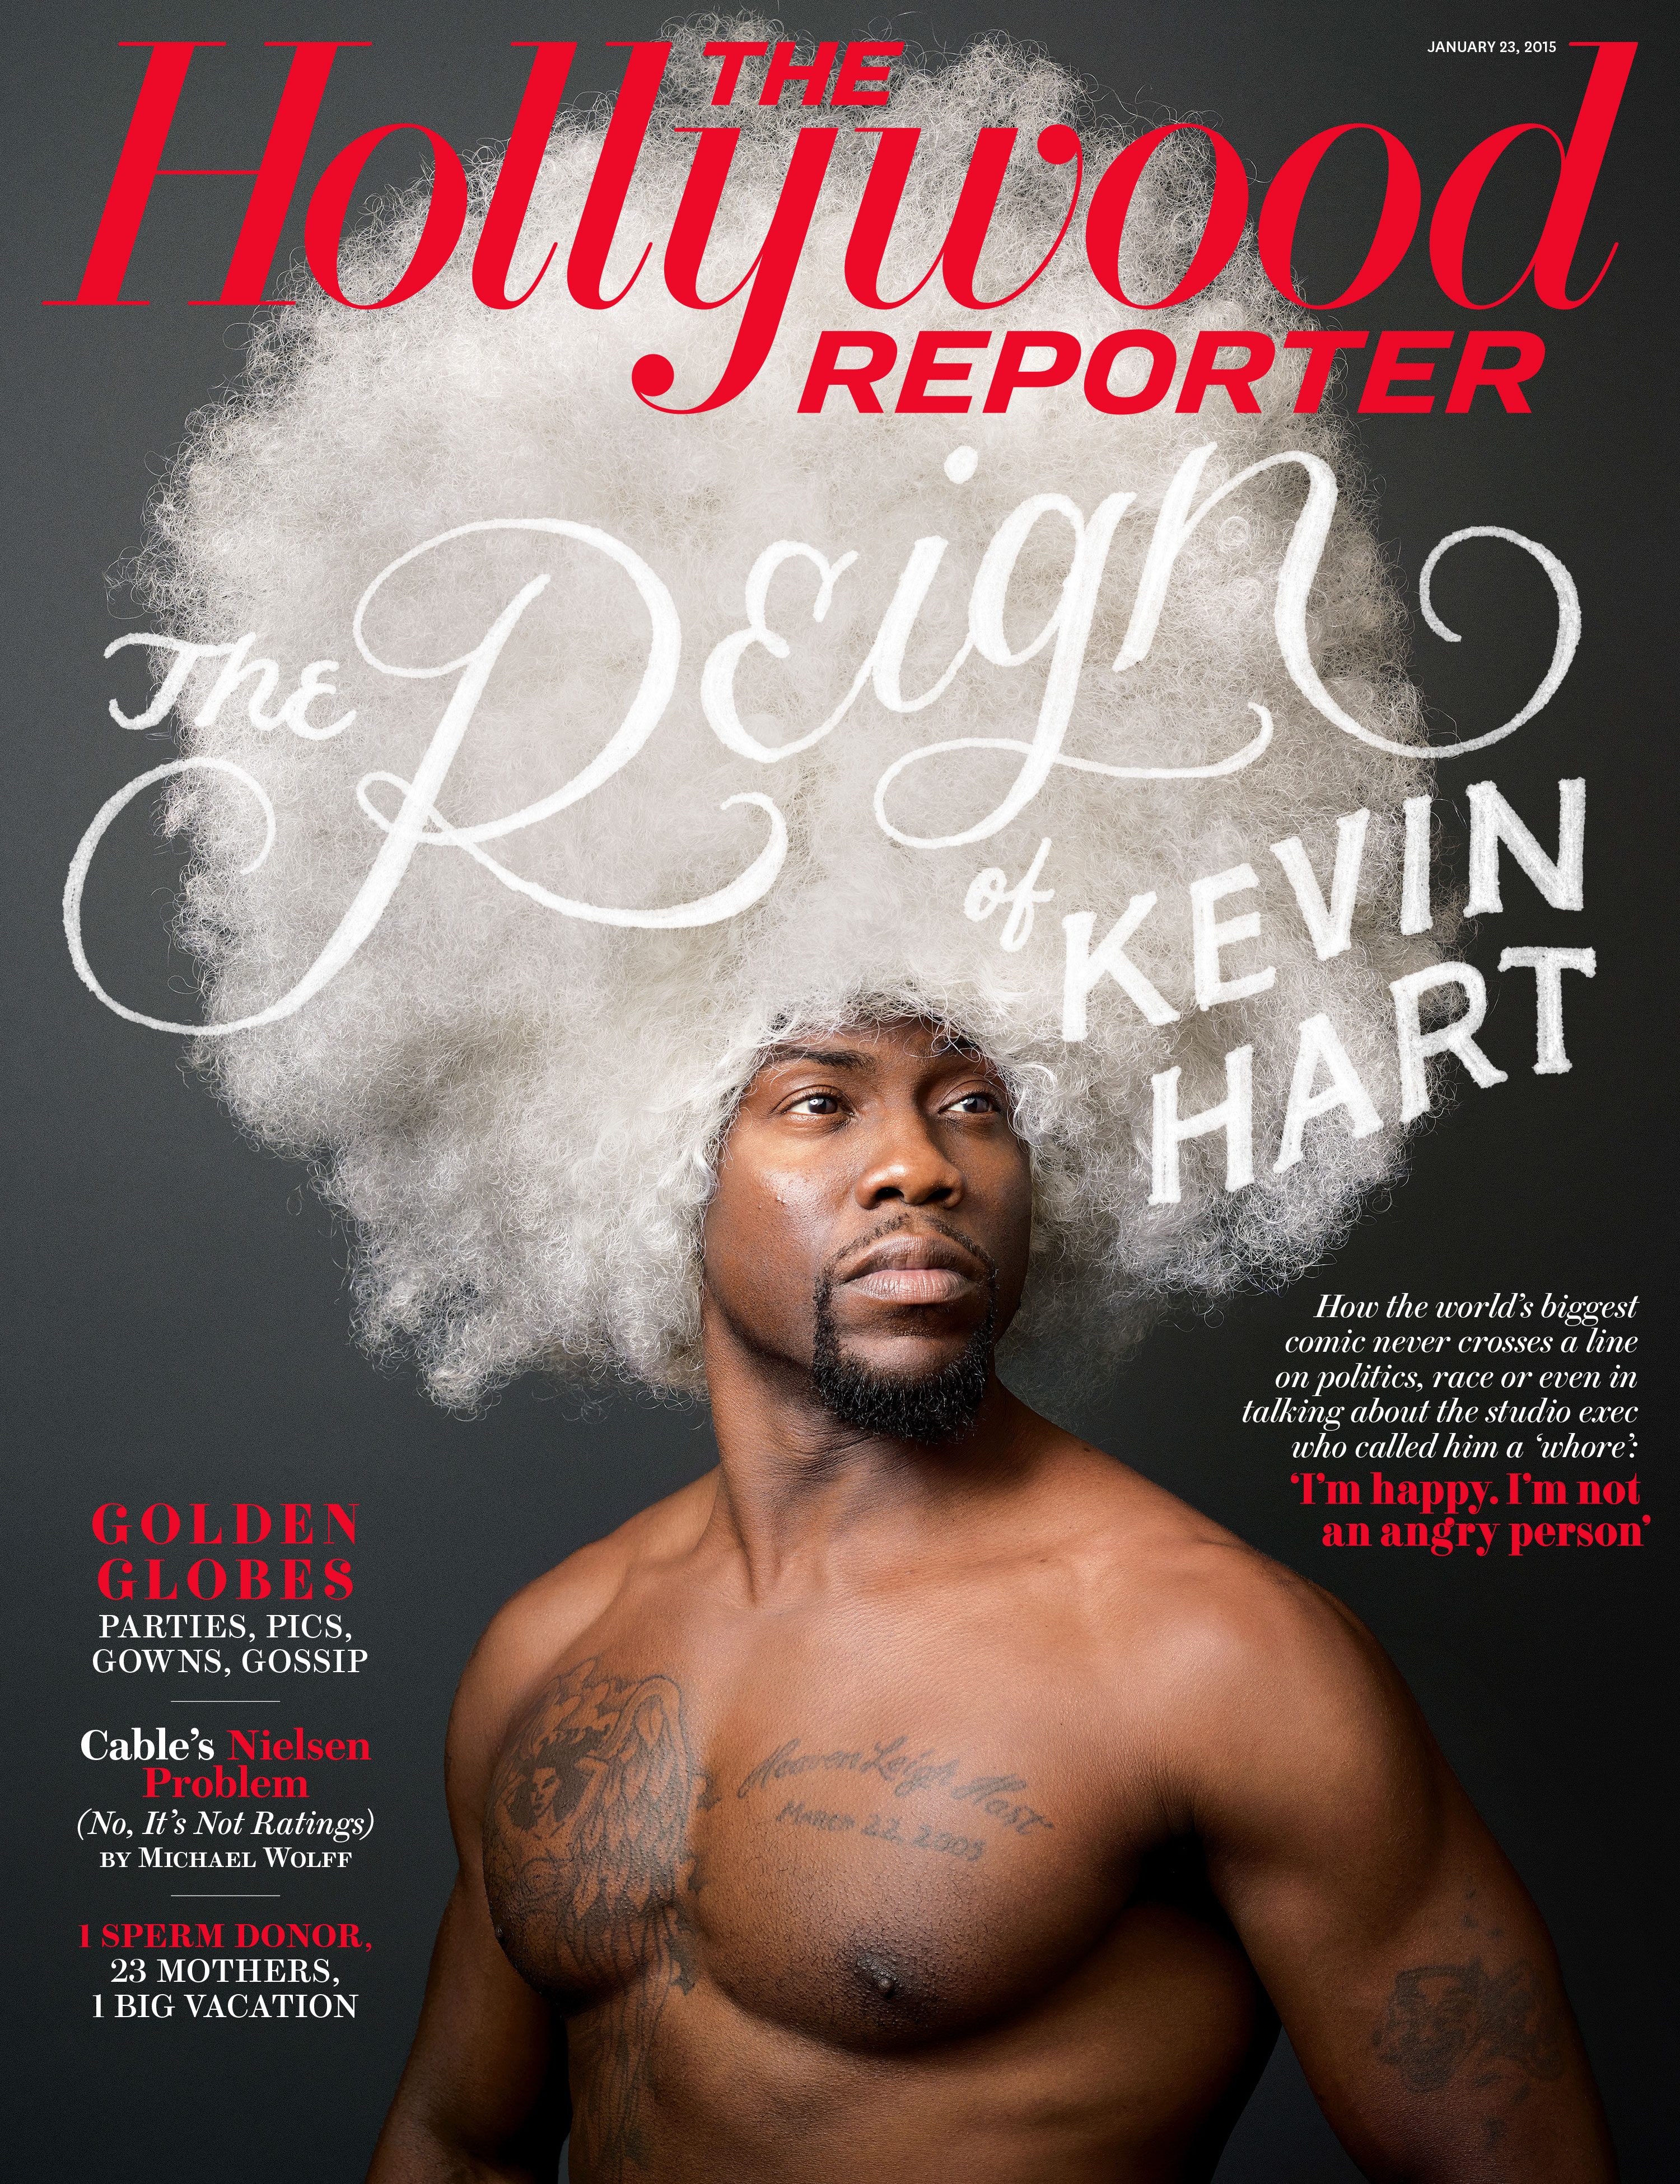 The Hollywood Reporter-"The Reign of Kevin Hart," January 23